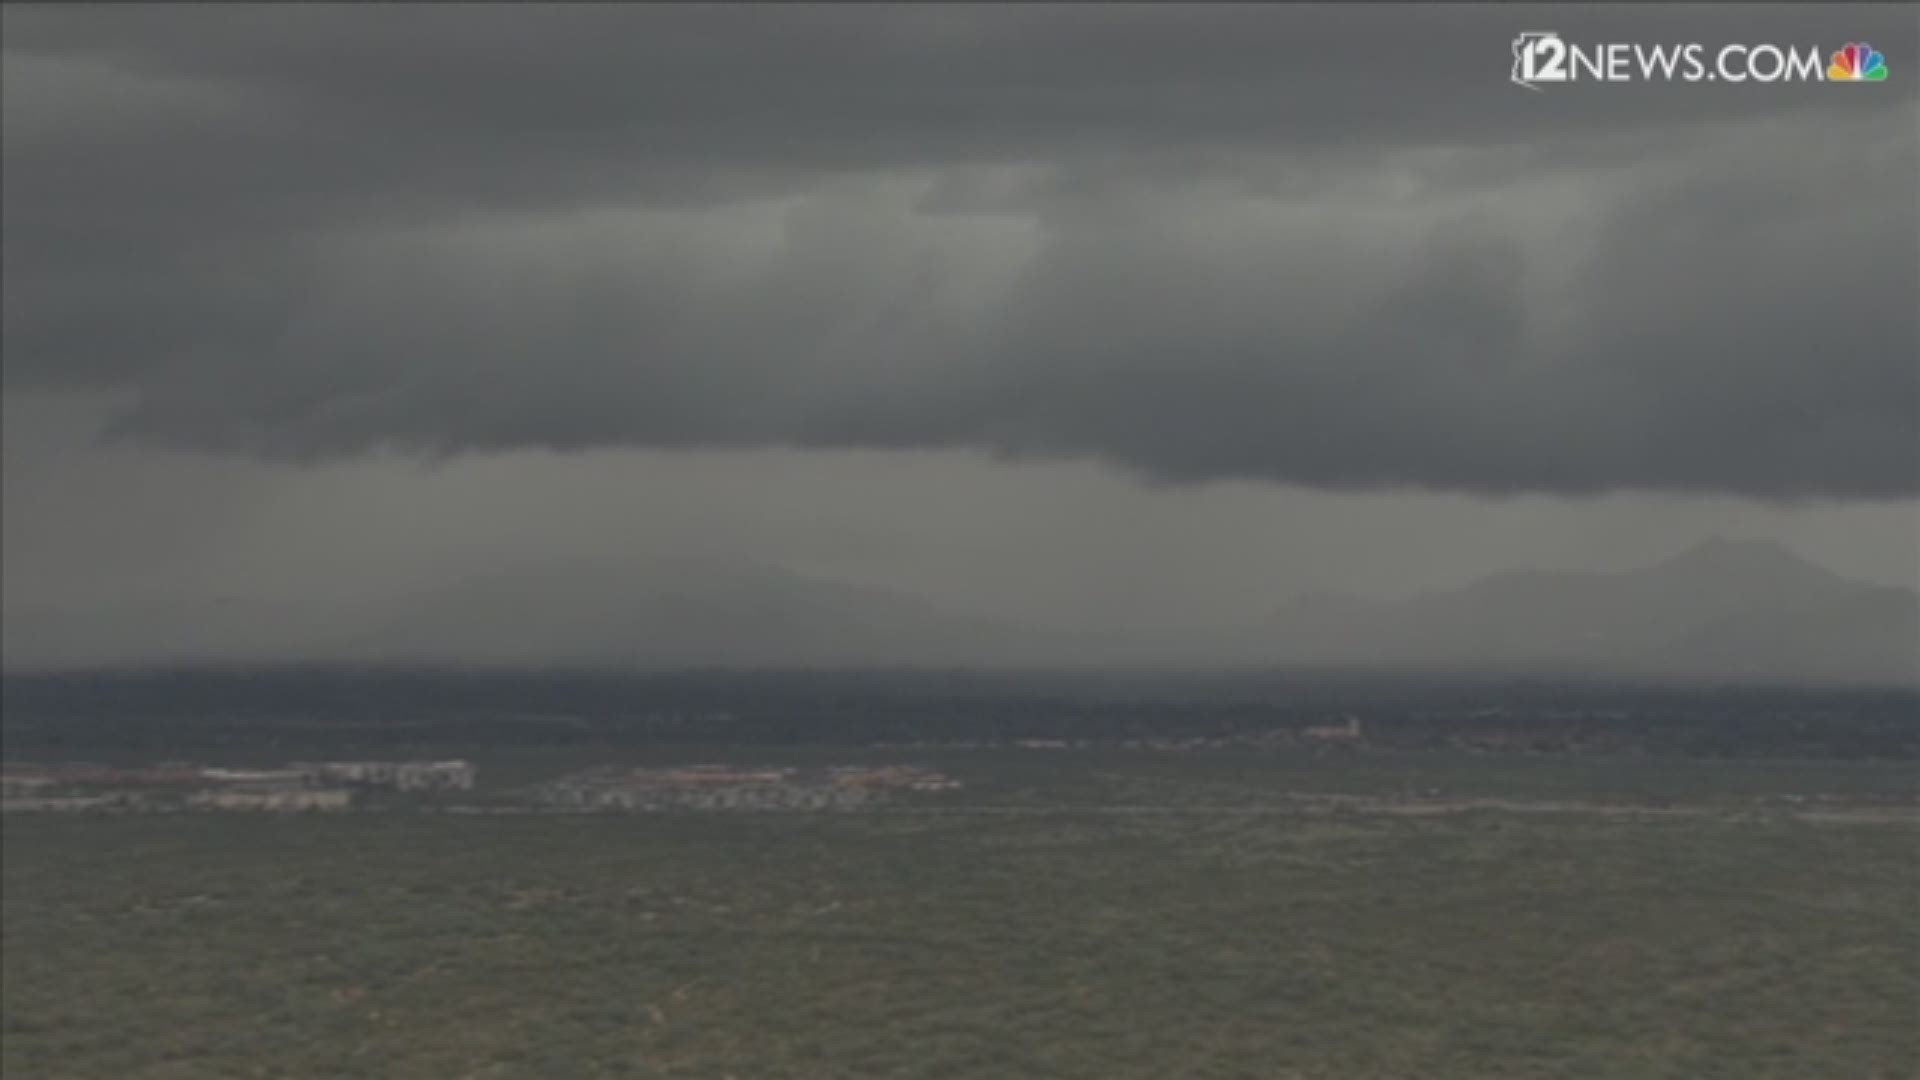 Another winter storm has hit the Valley and Sky 12 captured some massive clouds releasing a downpour over the area.